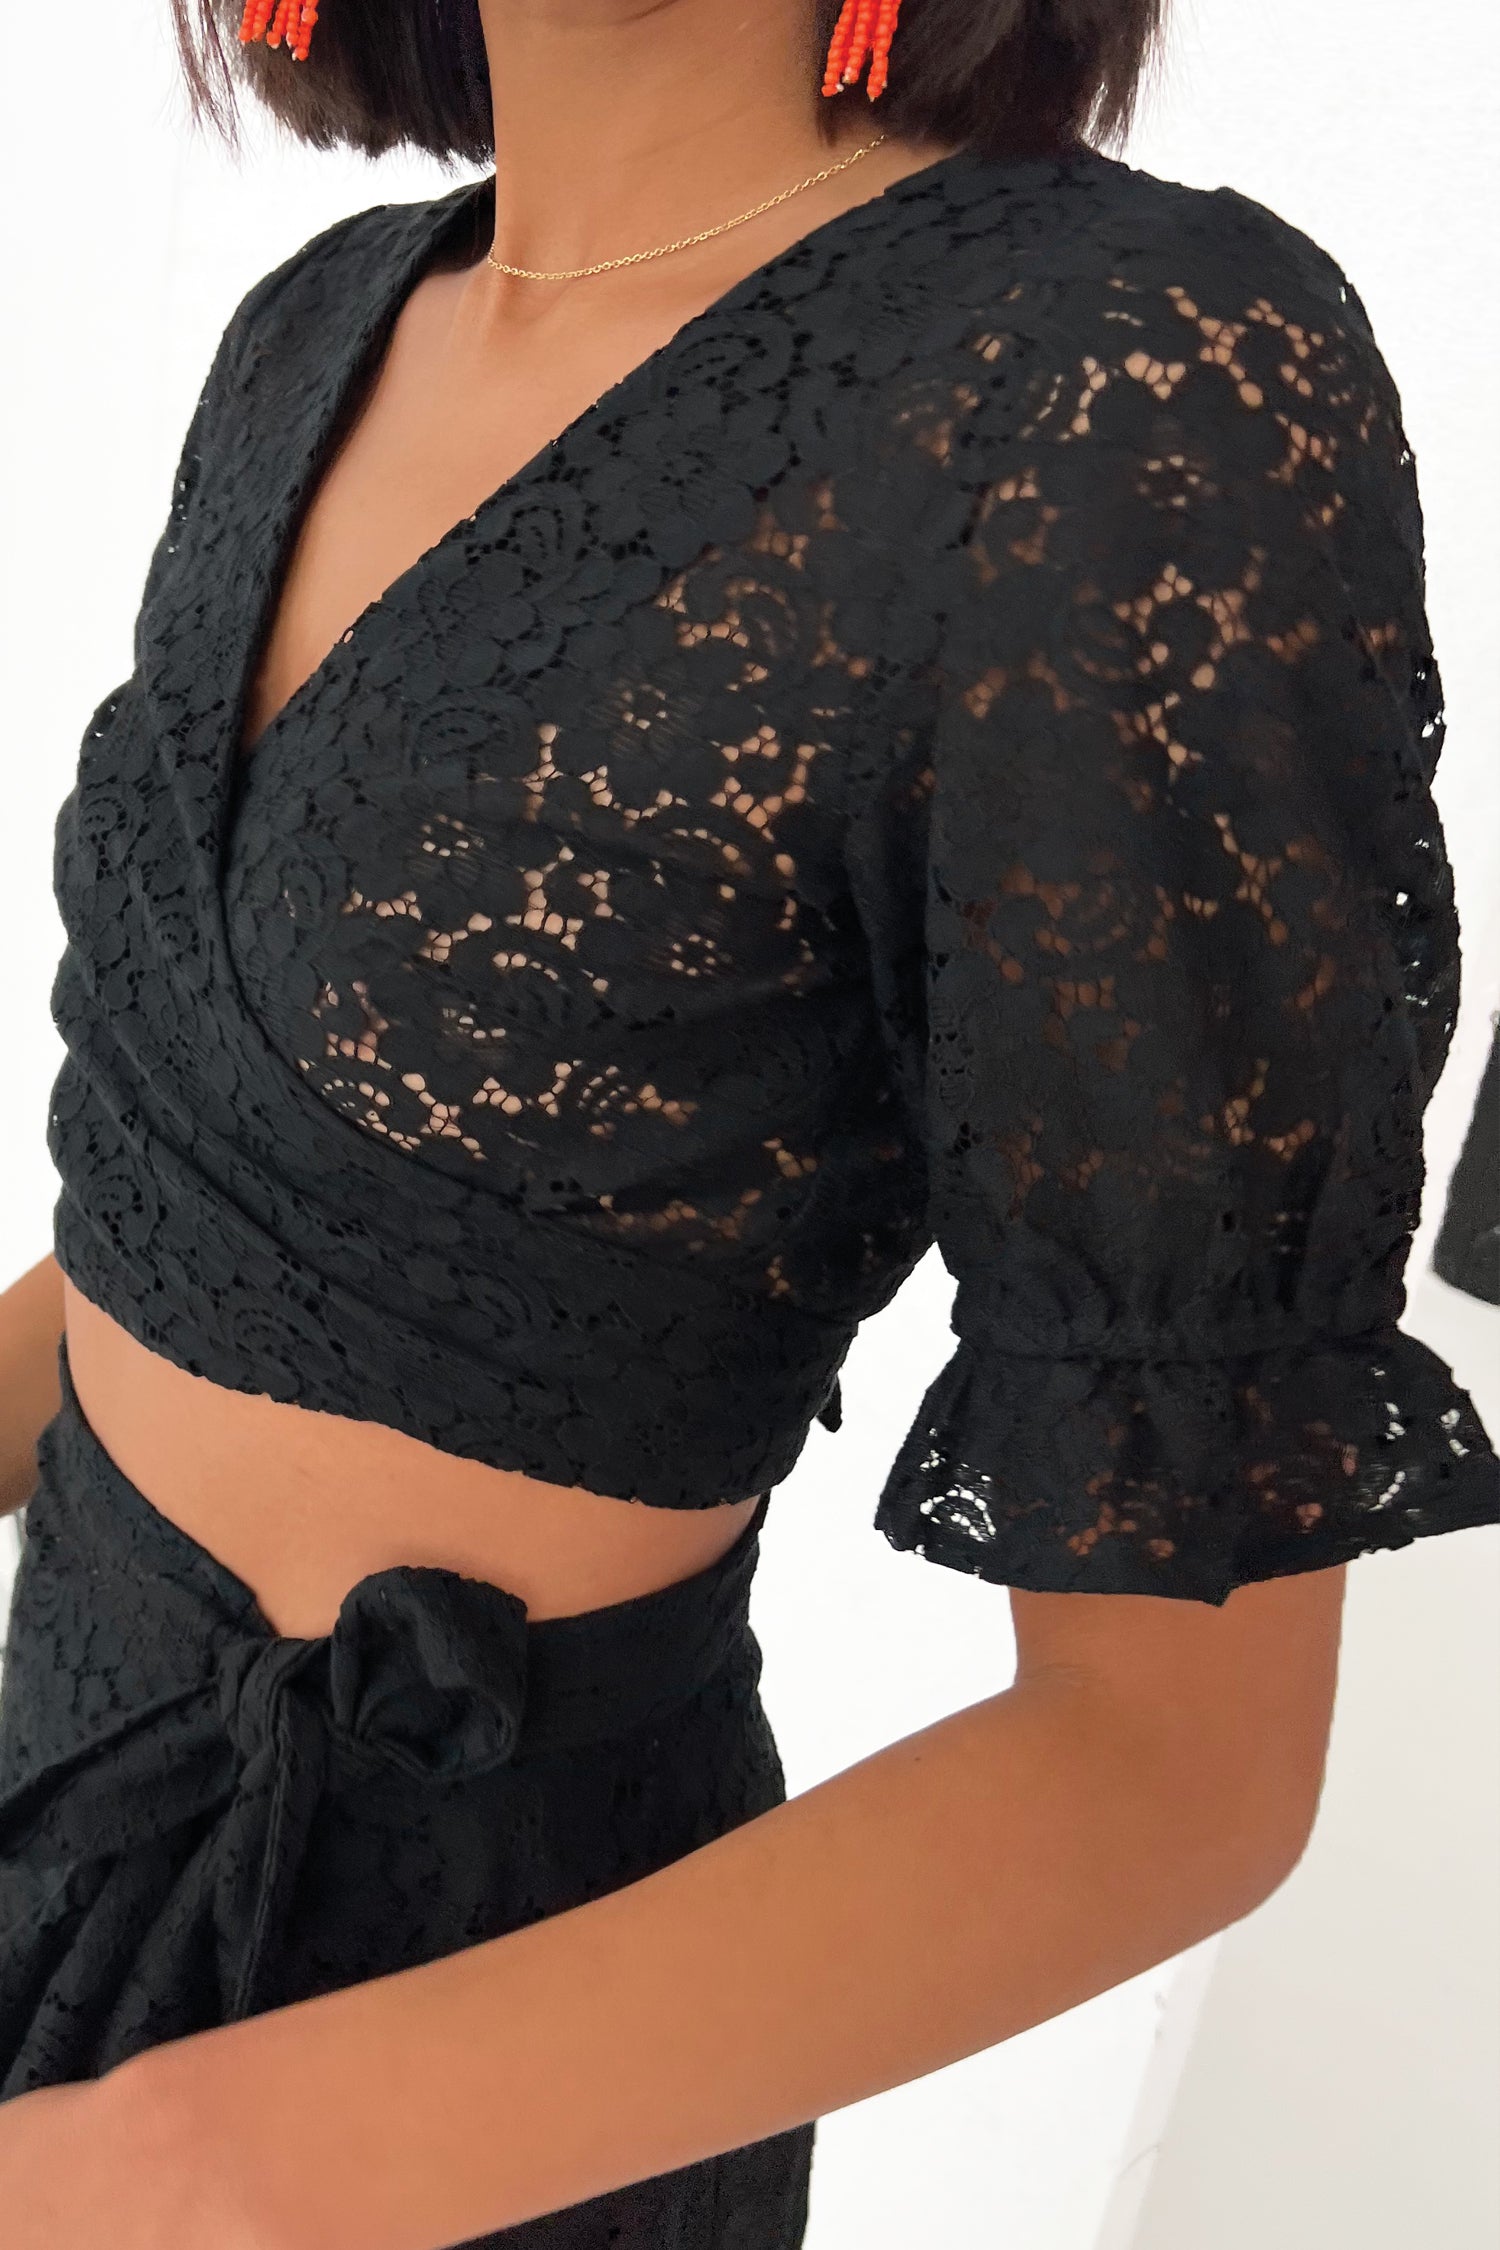 Model wearing Black Lace River Top close up